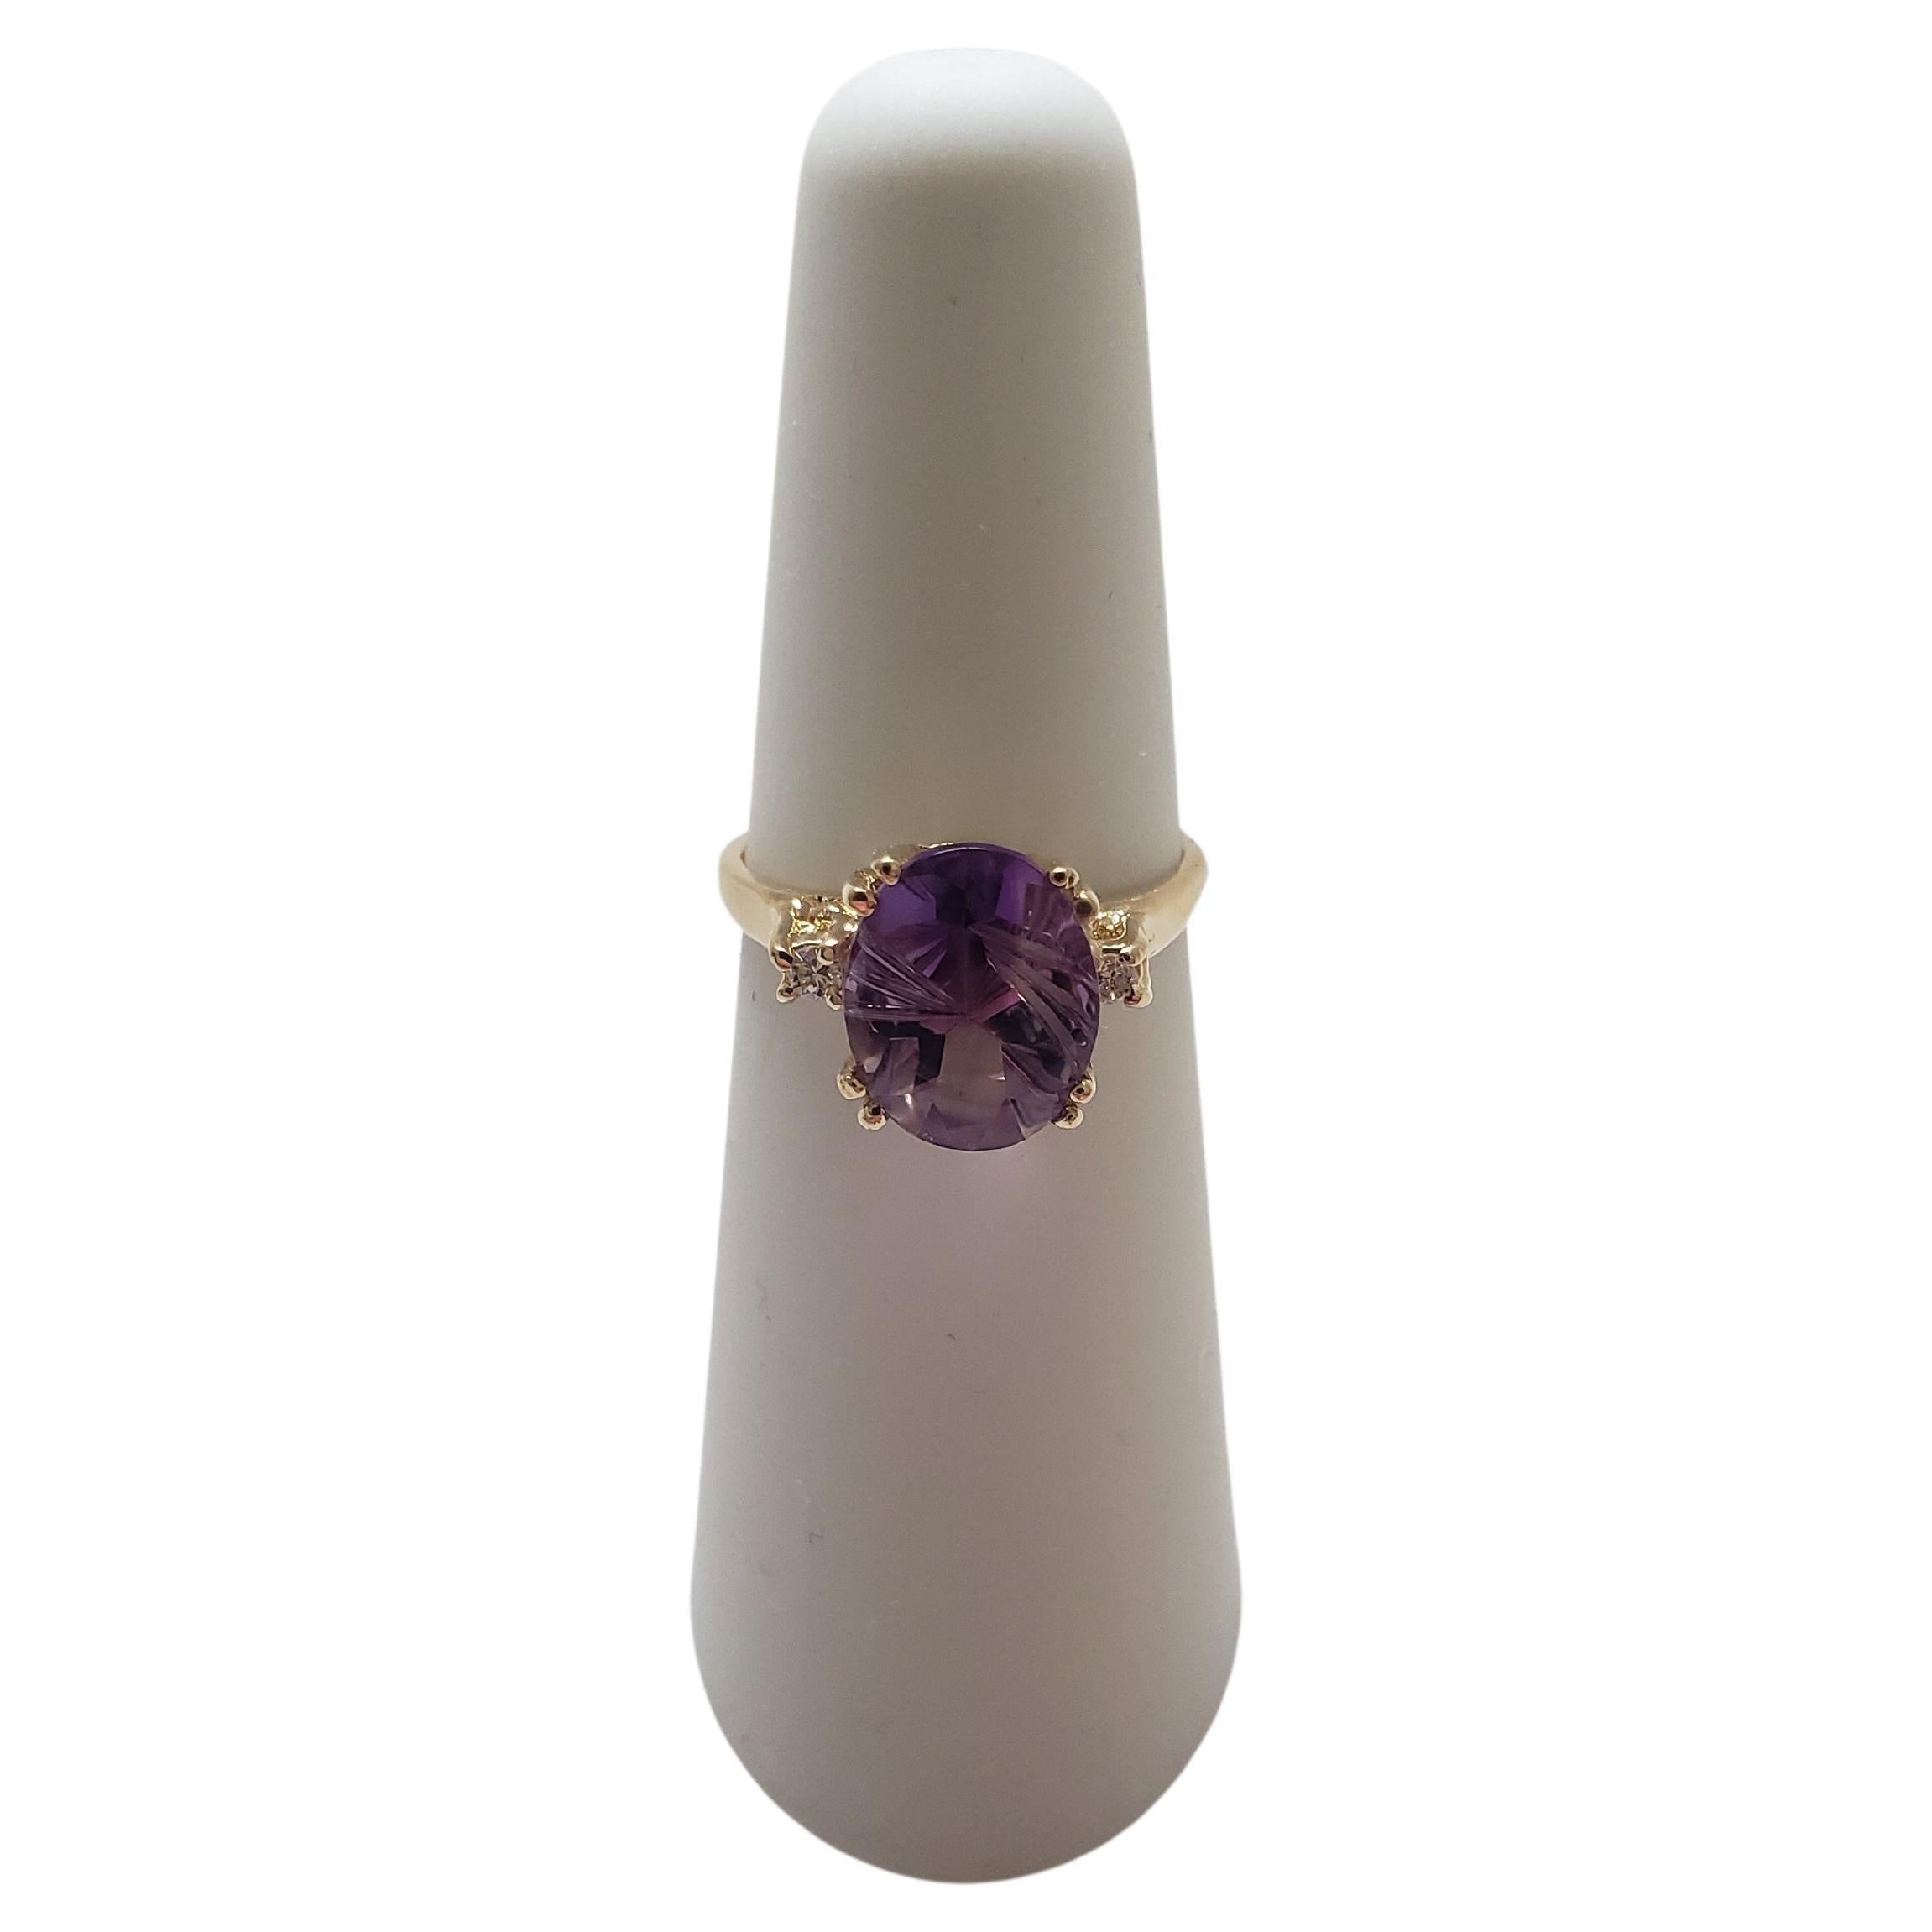 NEW 2 Ct. Natural Amethyst Fantasy Cut Ring with Diamonds in 14k Yellow Gold 